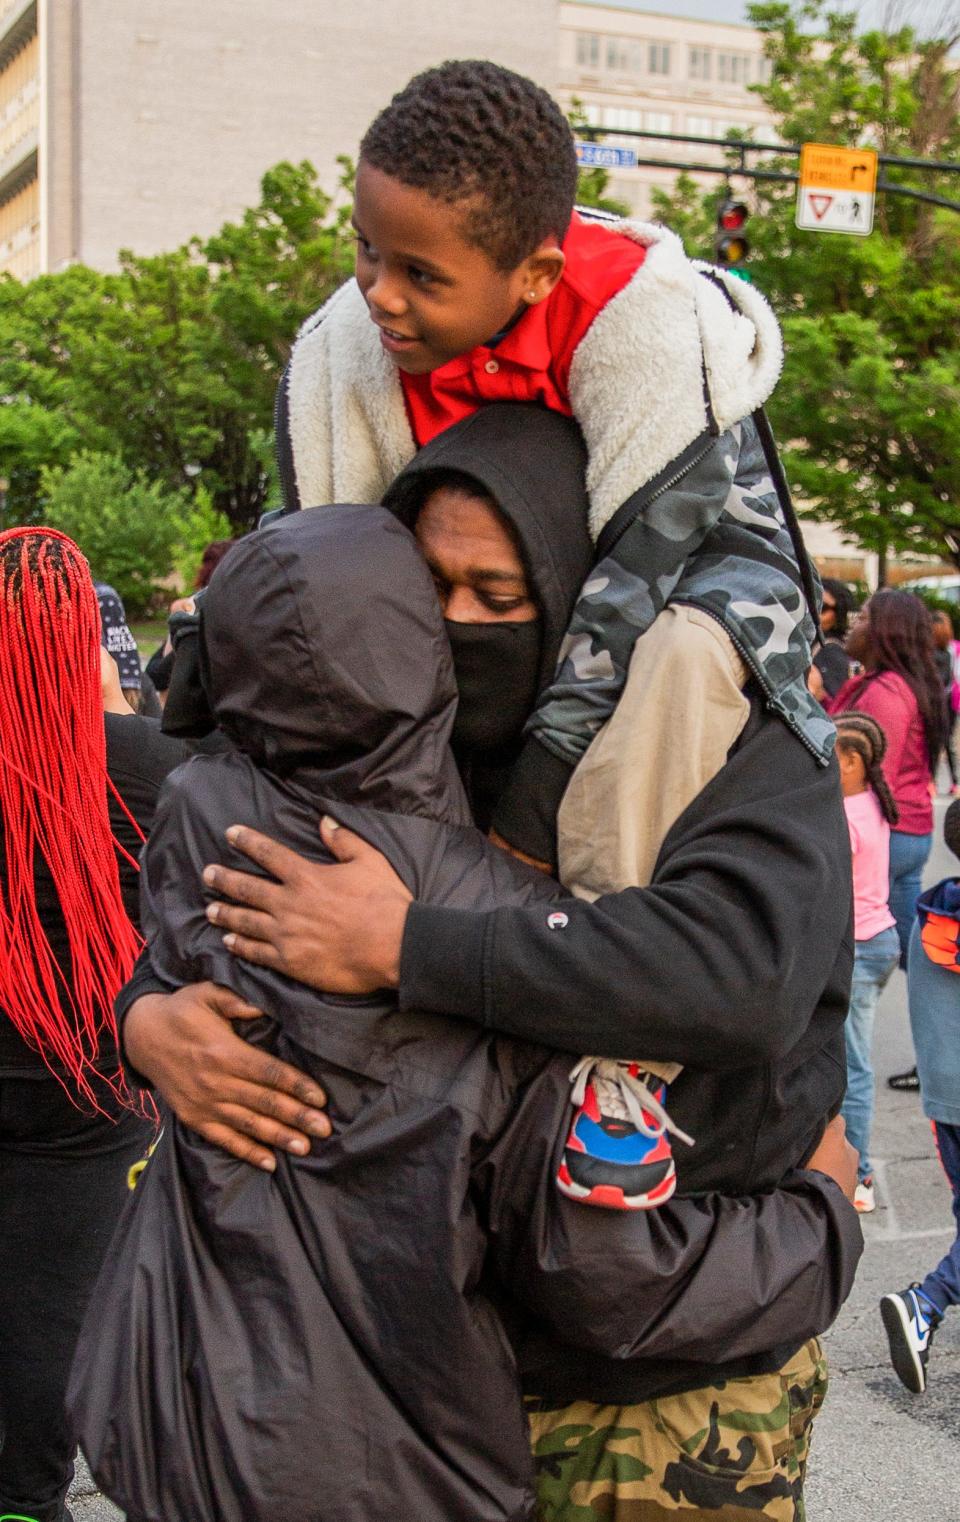 Protesters console each other following the shooting death of Omari Cryerin downtown Louisville on May 23, 2022. Cryer was killed last Friday.